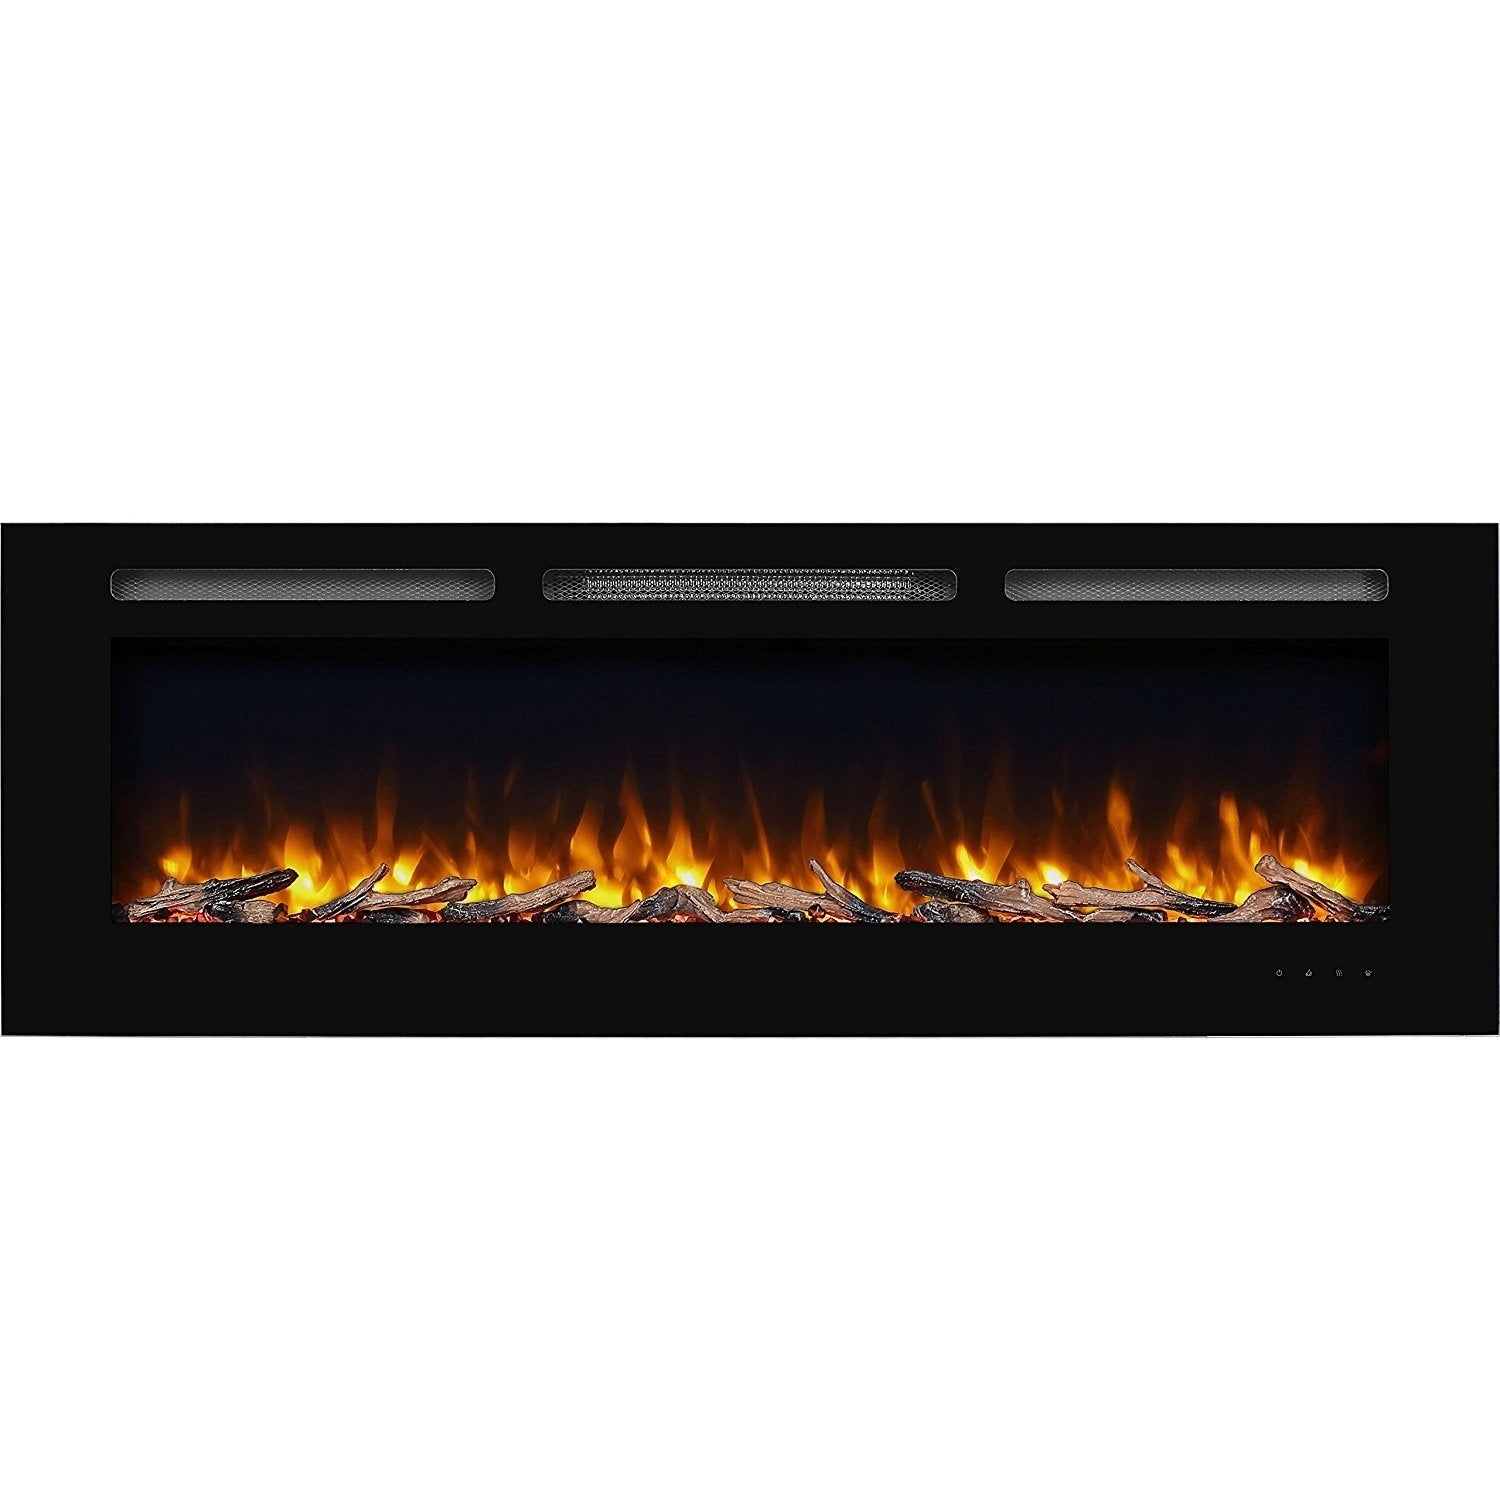 Decor Flame Electric Fireplace Awesome 60" Alice In Wall Recessed Electric Fireplace 1500w Black